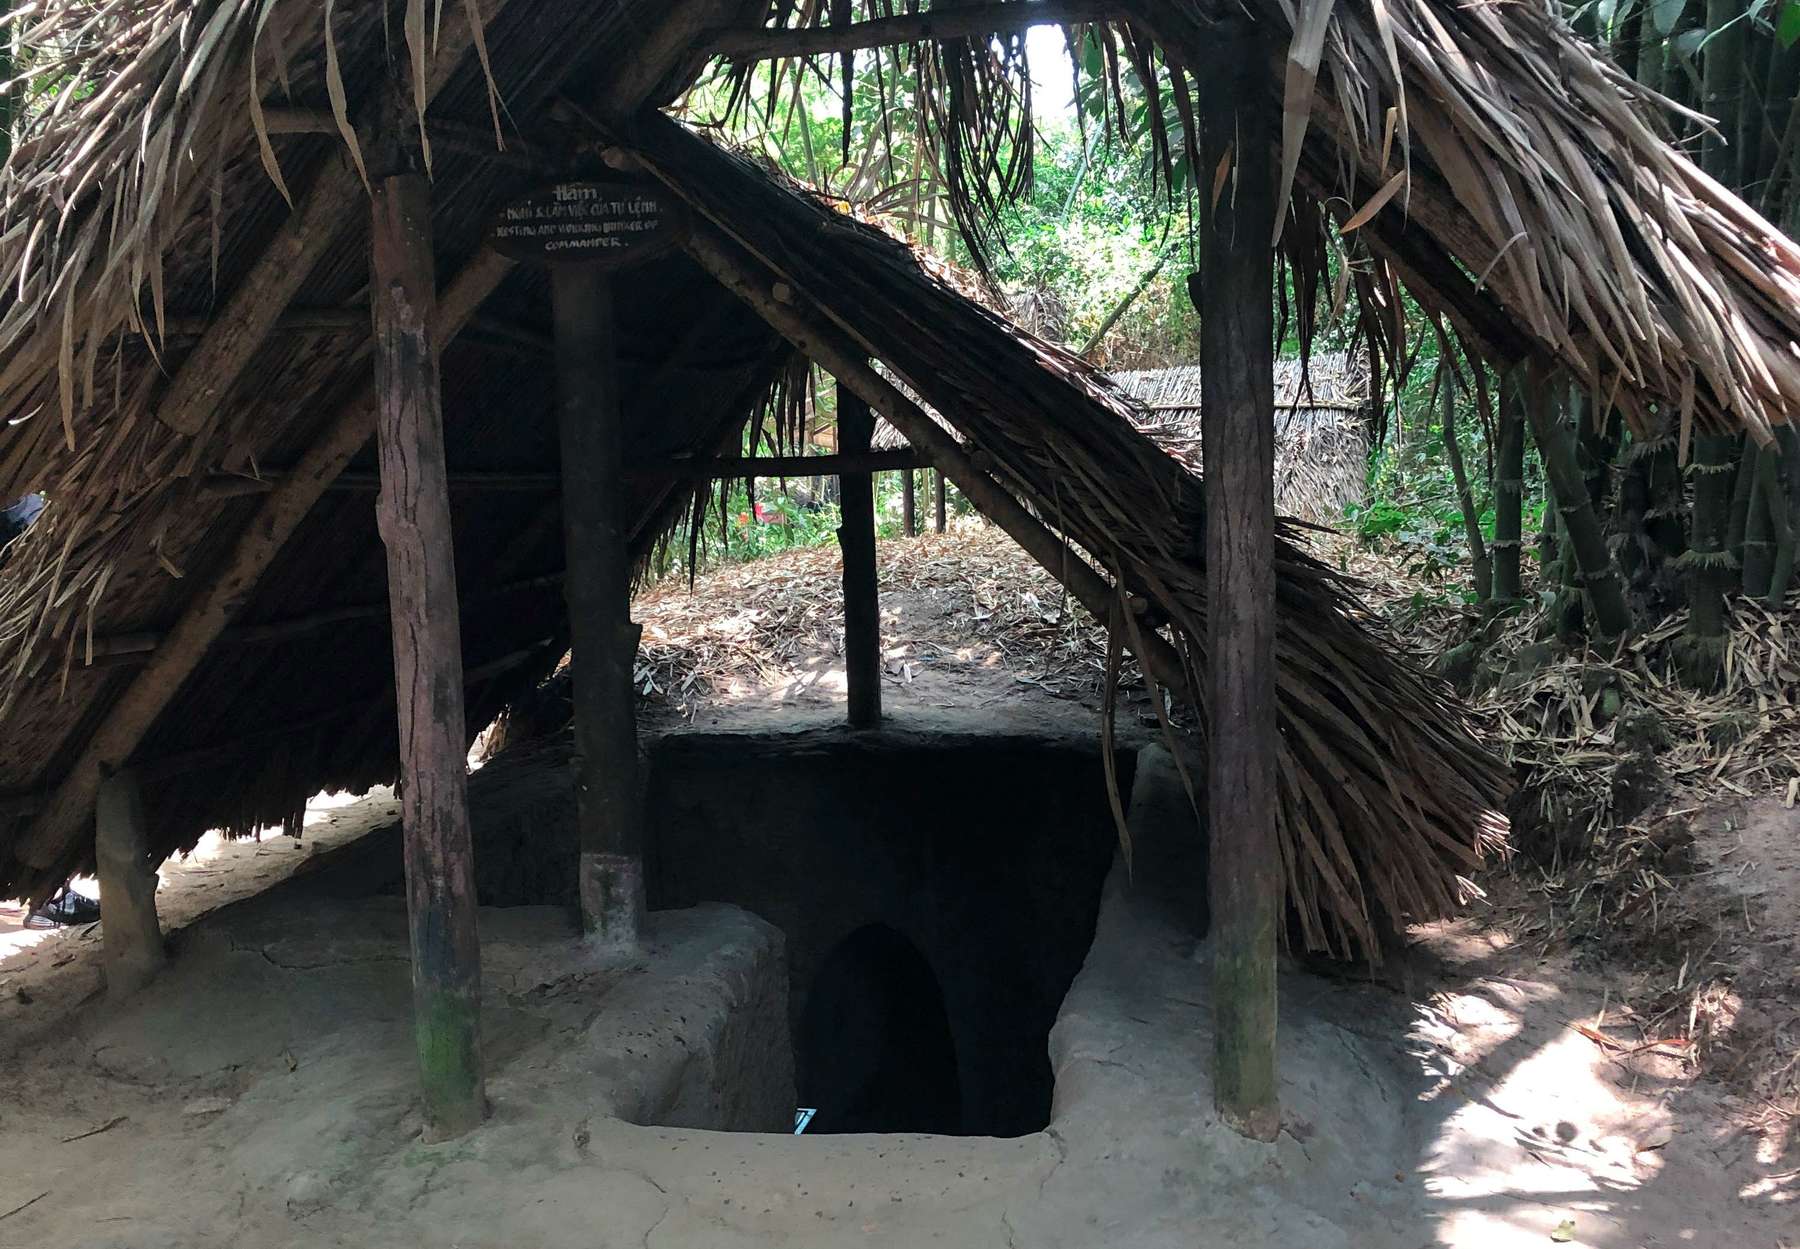 Cu Chi Tunnels Tour Cost